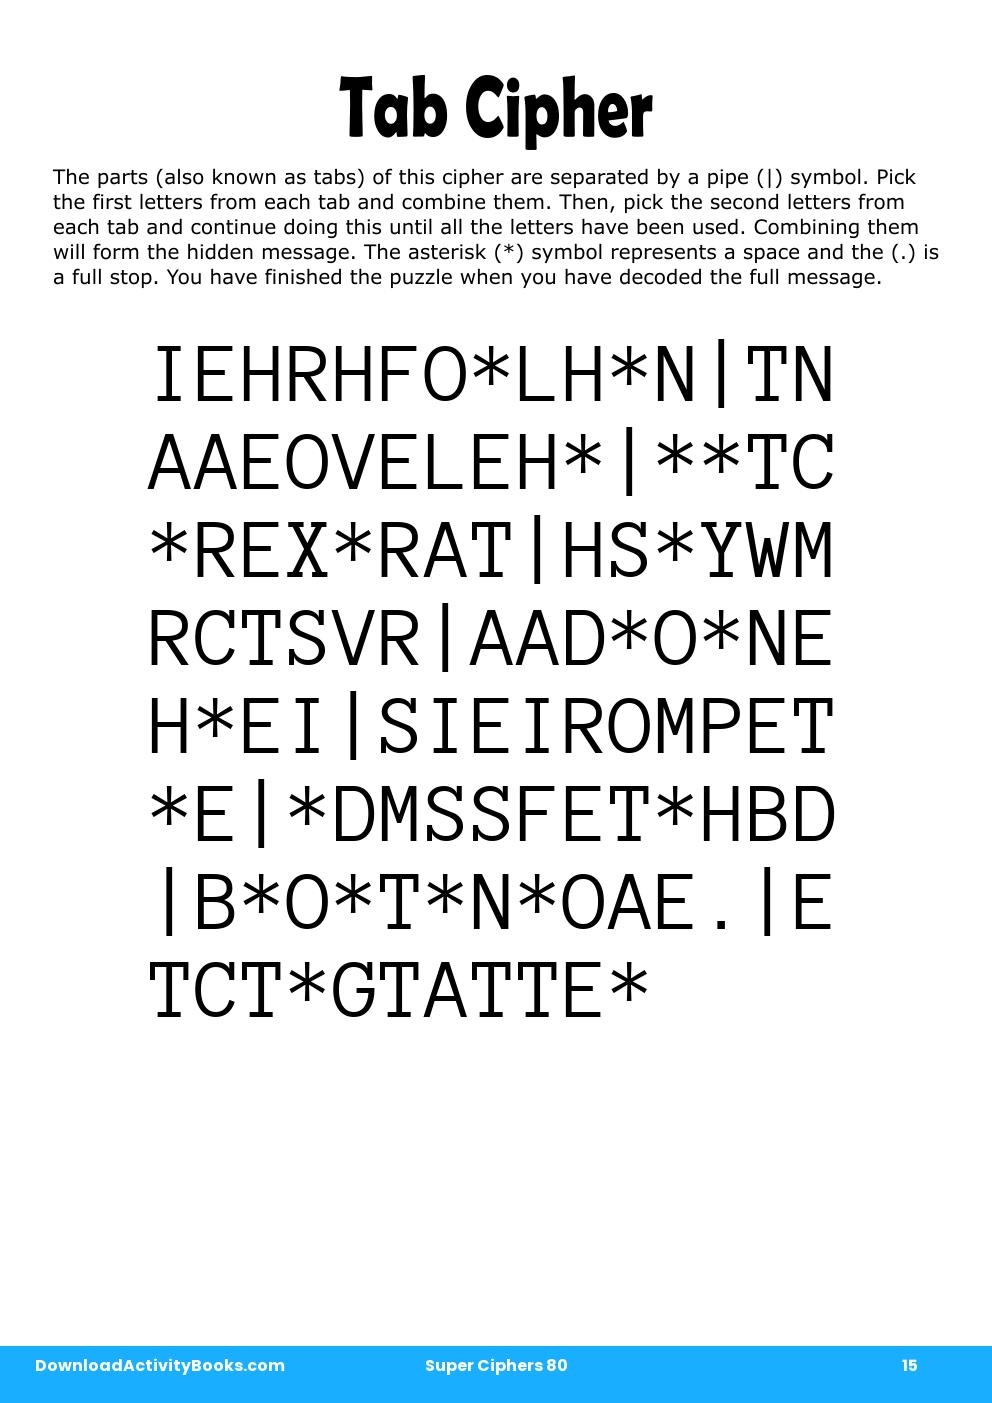 Tab Cipher in Super Ciphers 80